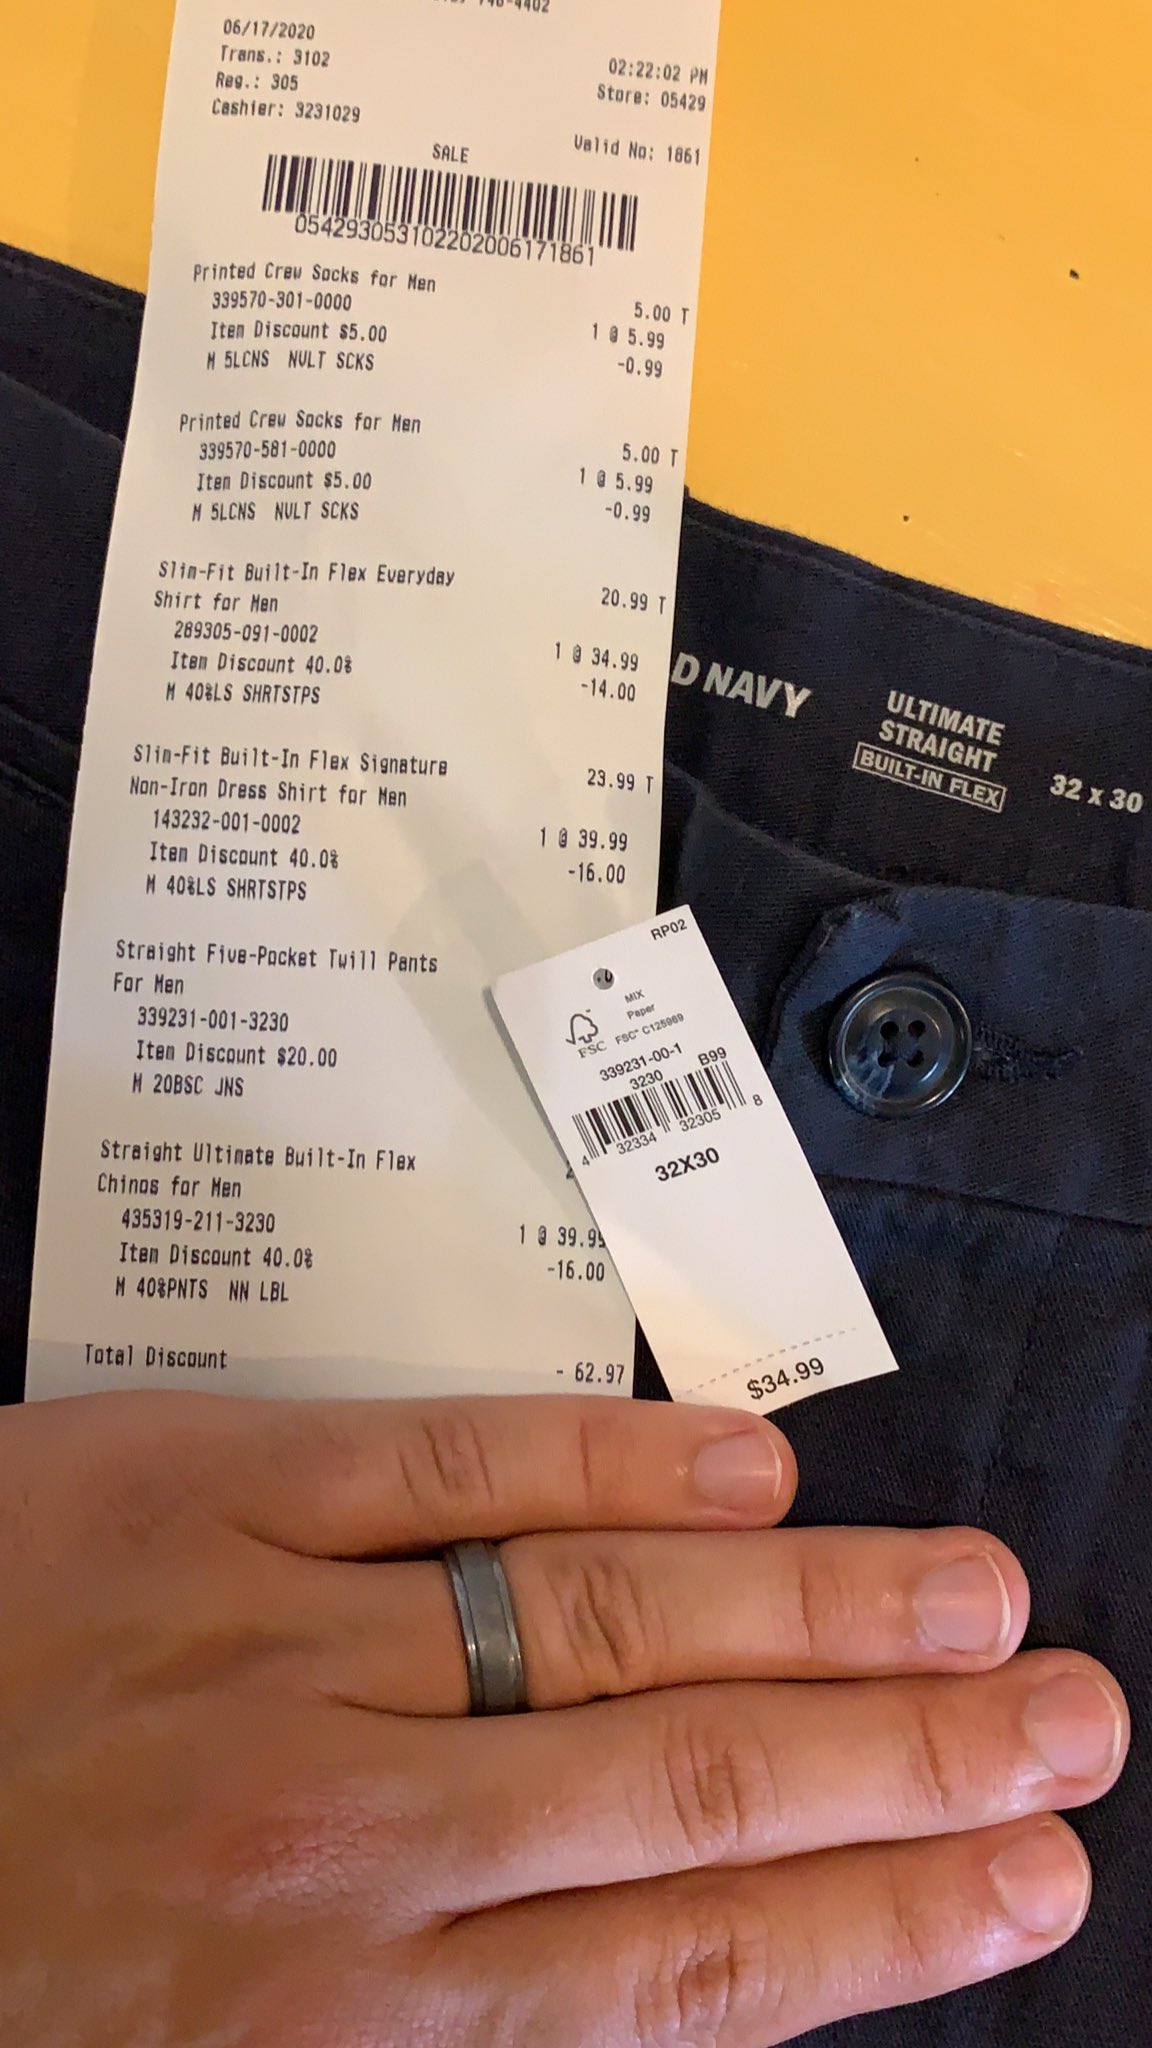 Matt Sain on X: Here's a picture of my receipt, tag, and pants